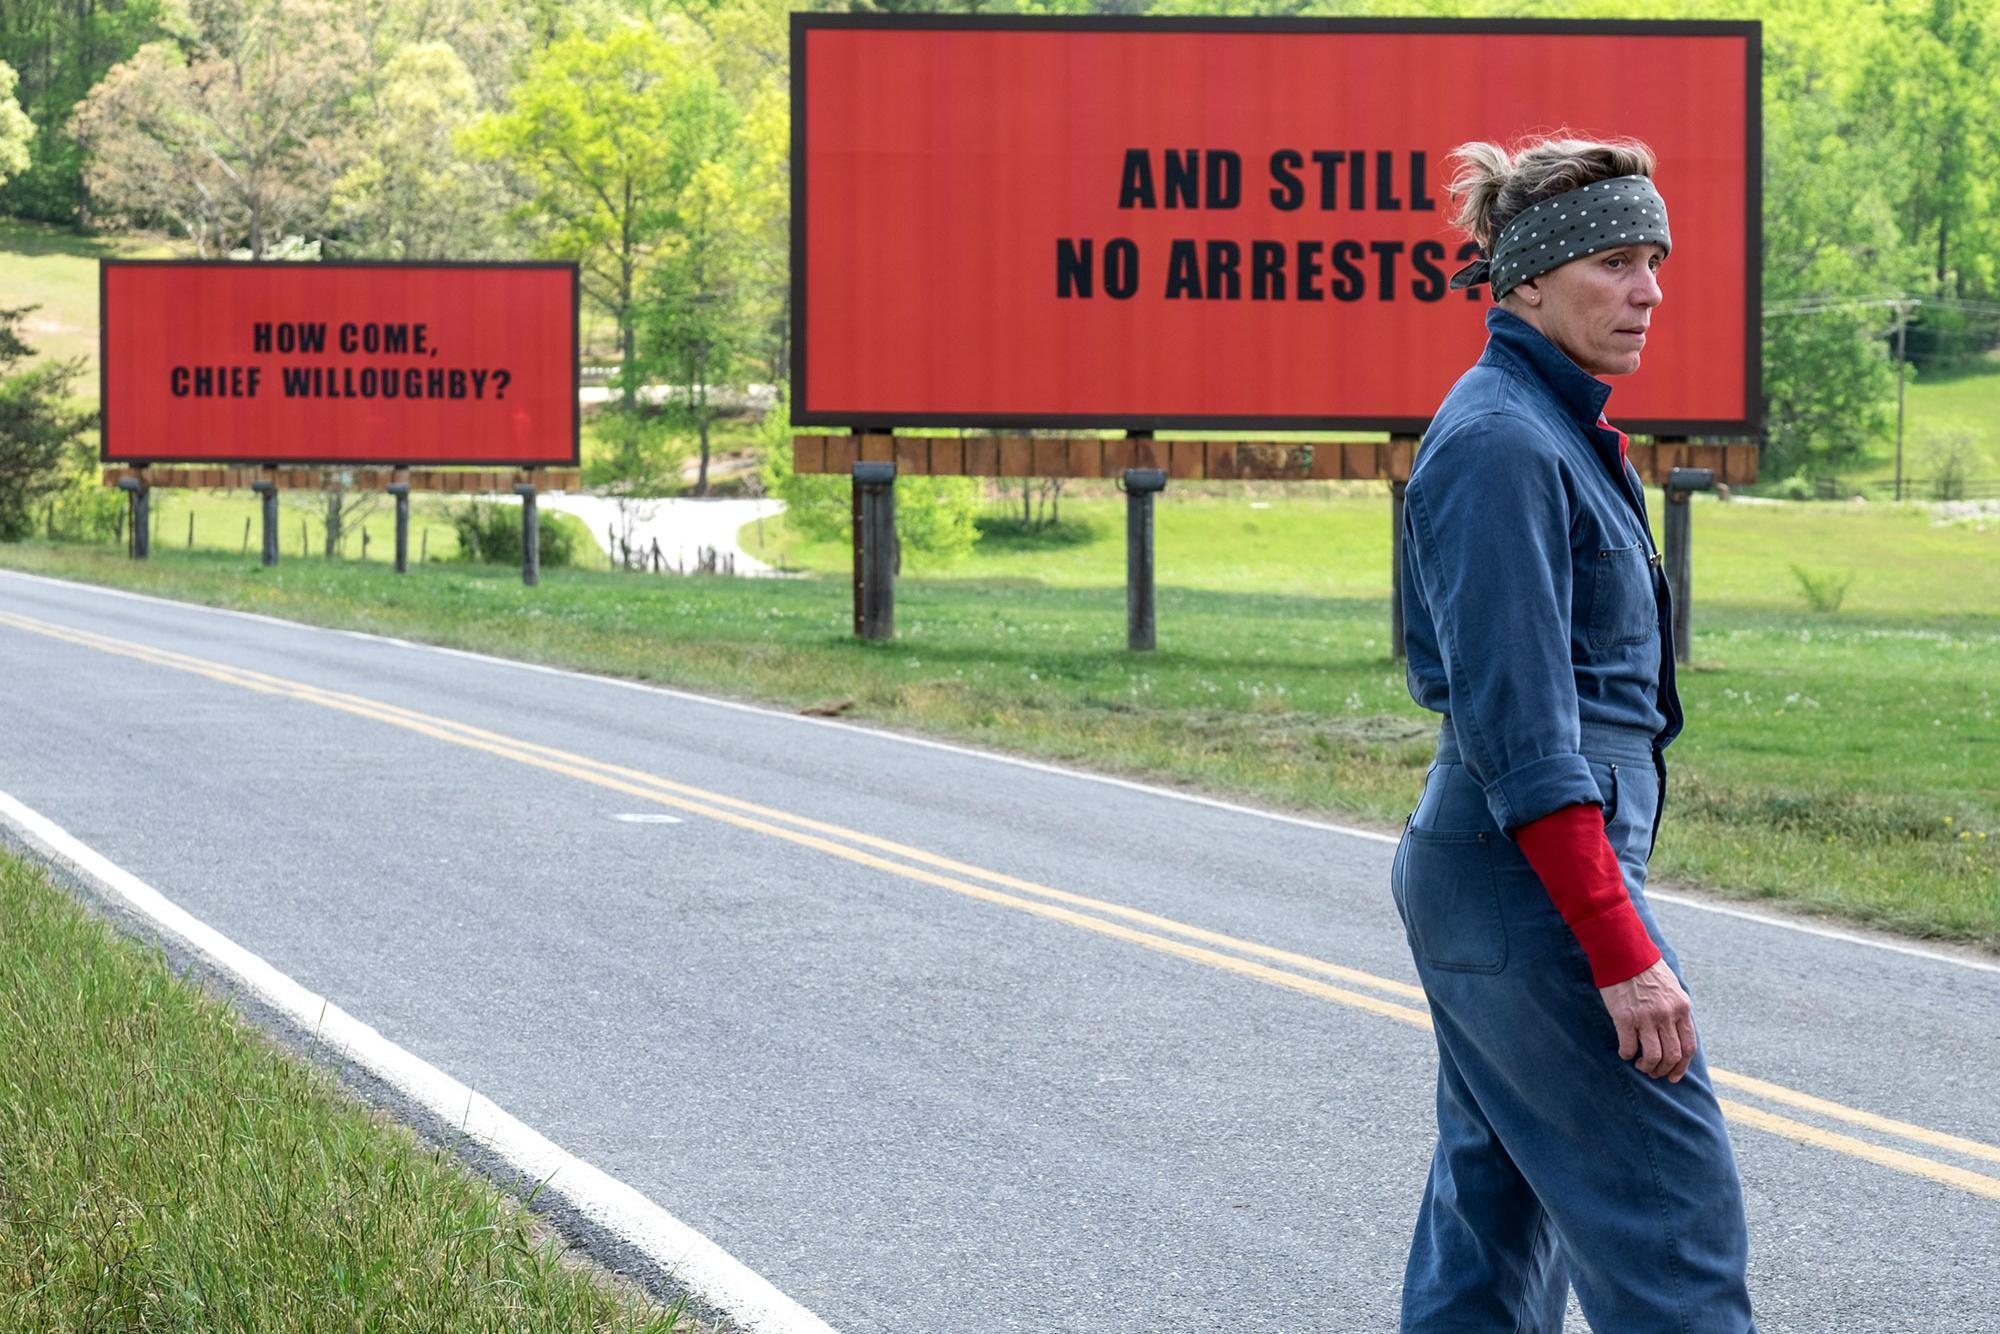 Frances McDormand is superb as the stoical, strong-willed but vulnerable mother